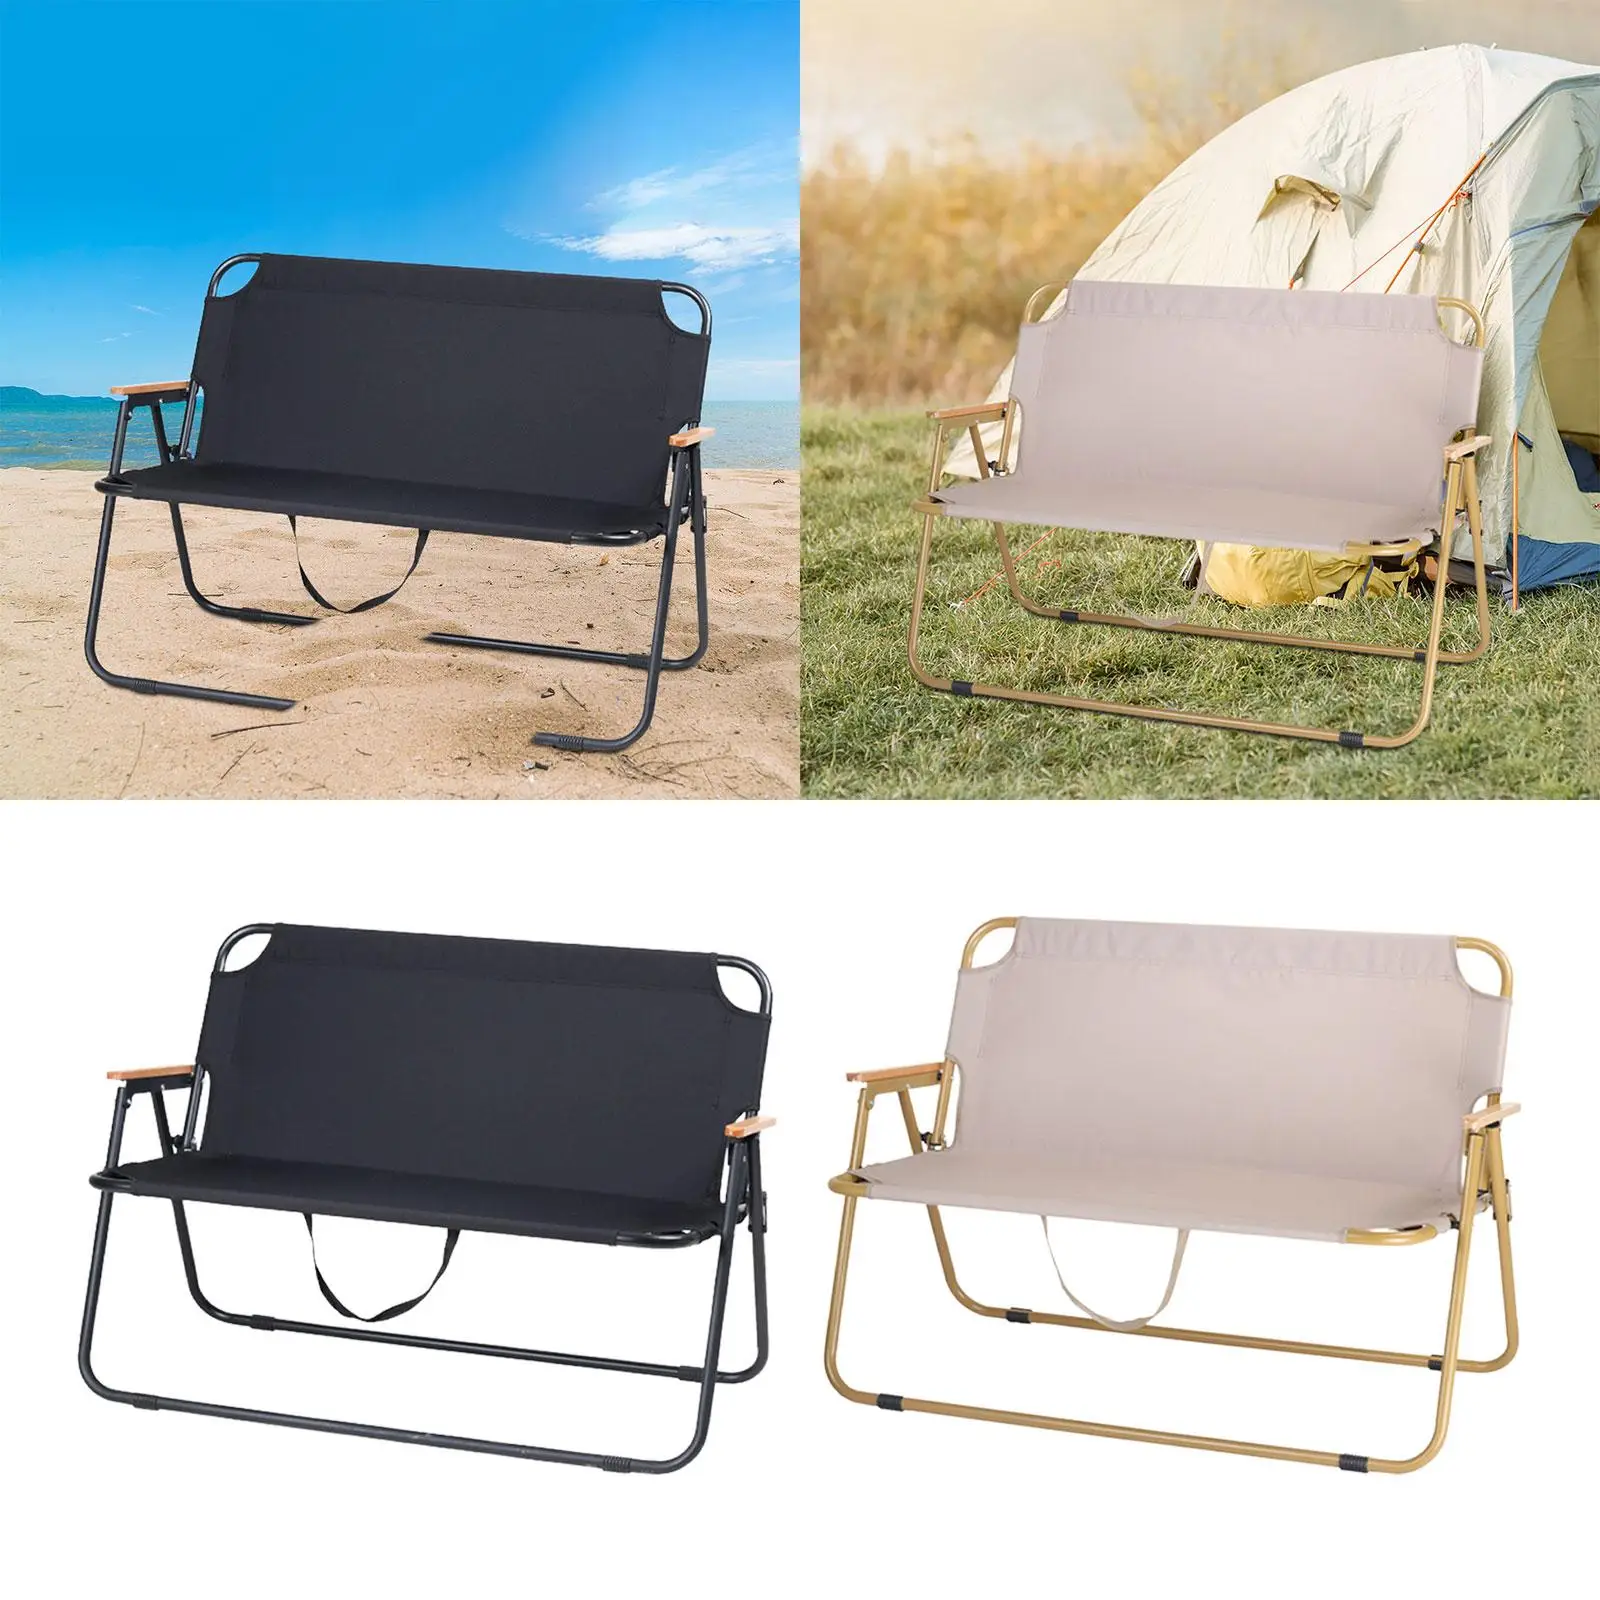 Folding Camping Chair Lightweight Outside Patio Picnic Adult Double Chair Hiking Backpacking Fishing Traveling Camp Chair